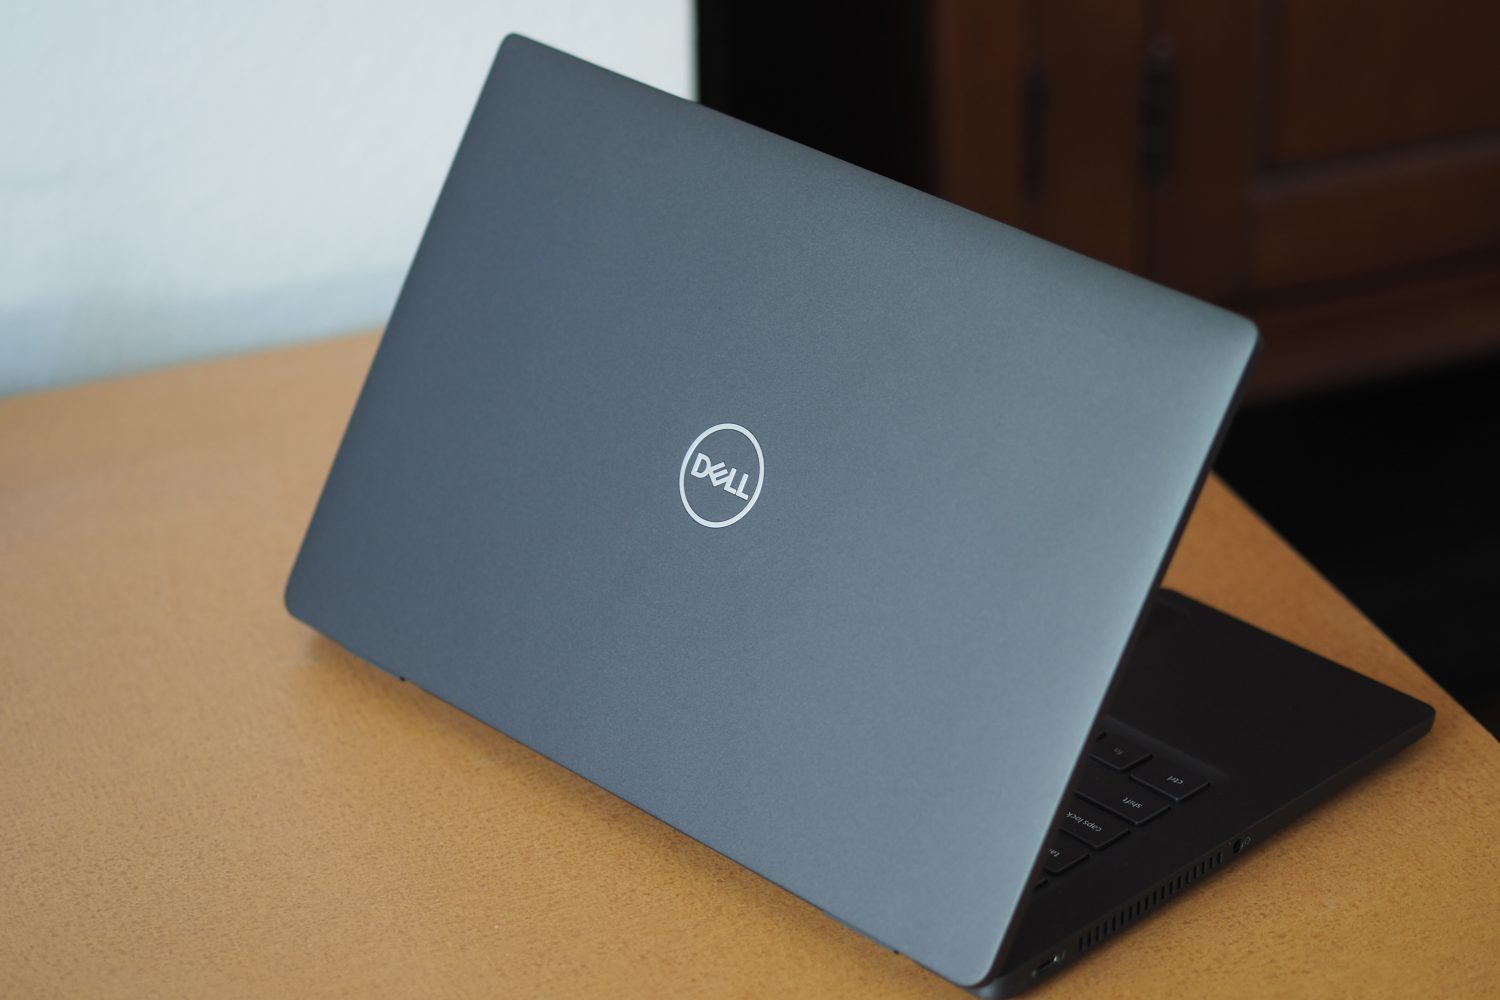 Dell Latitude 7330 UL rear view showing lid and logo.